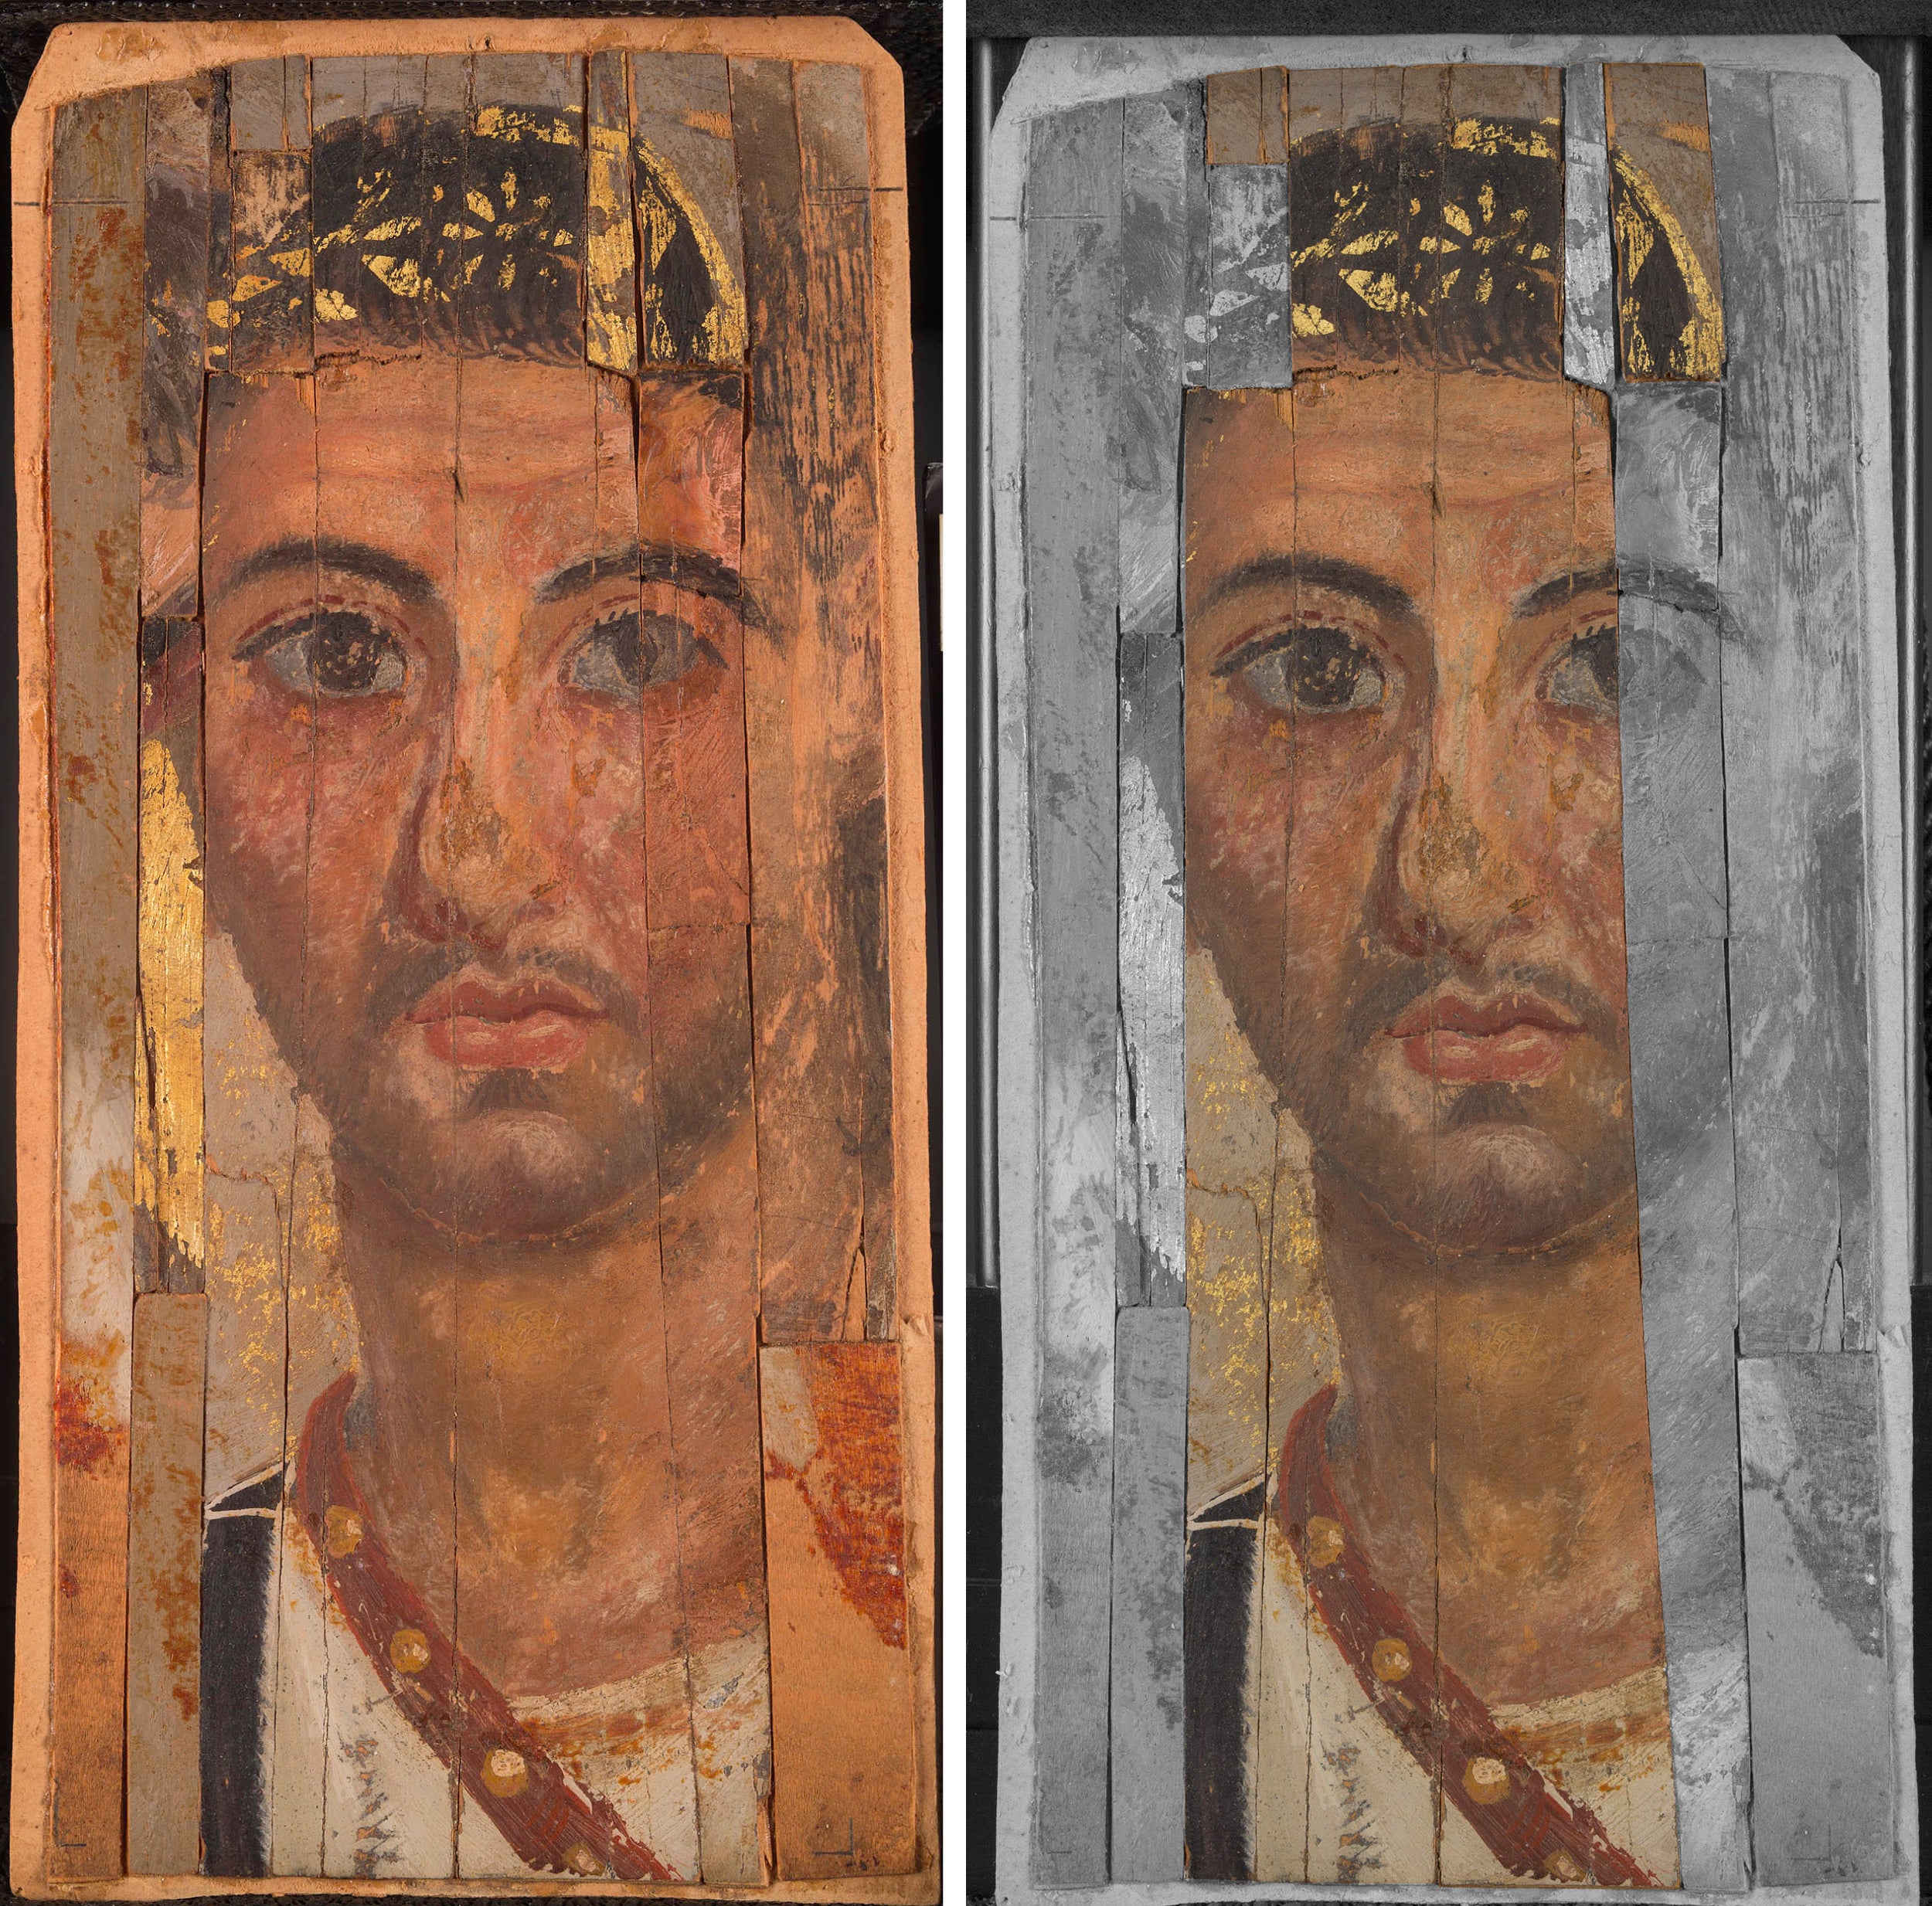 Side by side comparison shows Roman Egypt composite portrait of bearded man wearing white tunic next to diagram highlighting pieces of portrait determined by researchers to be added later from other ancient portraits.